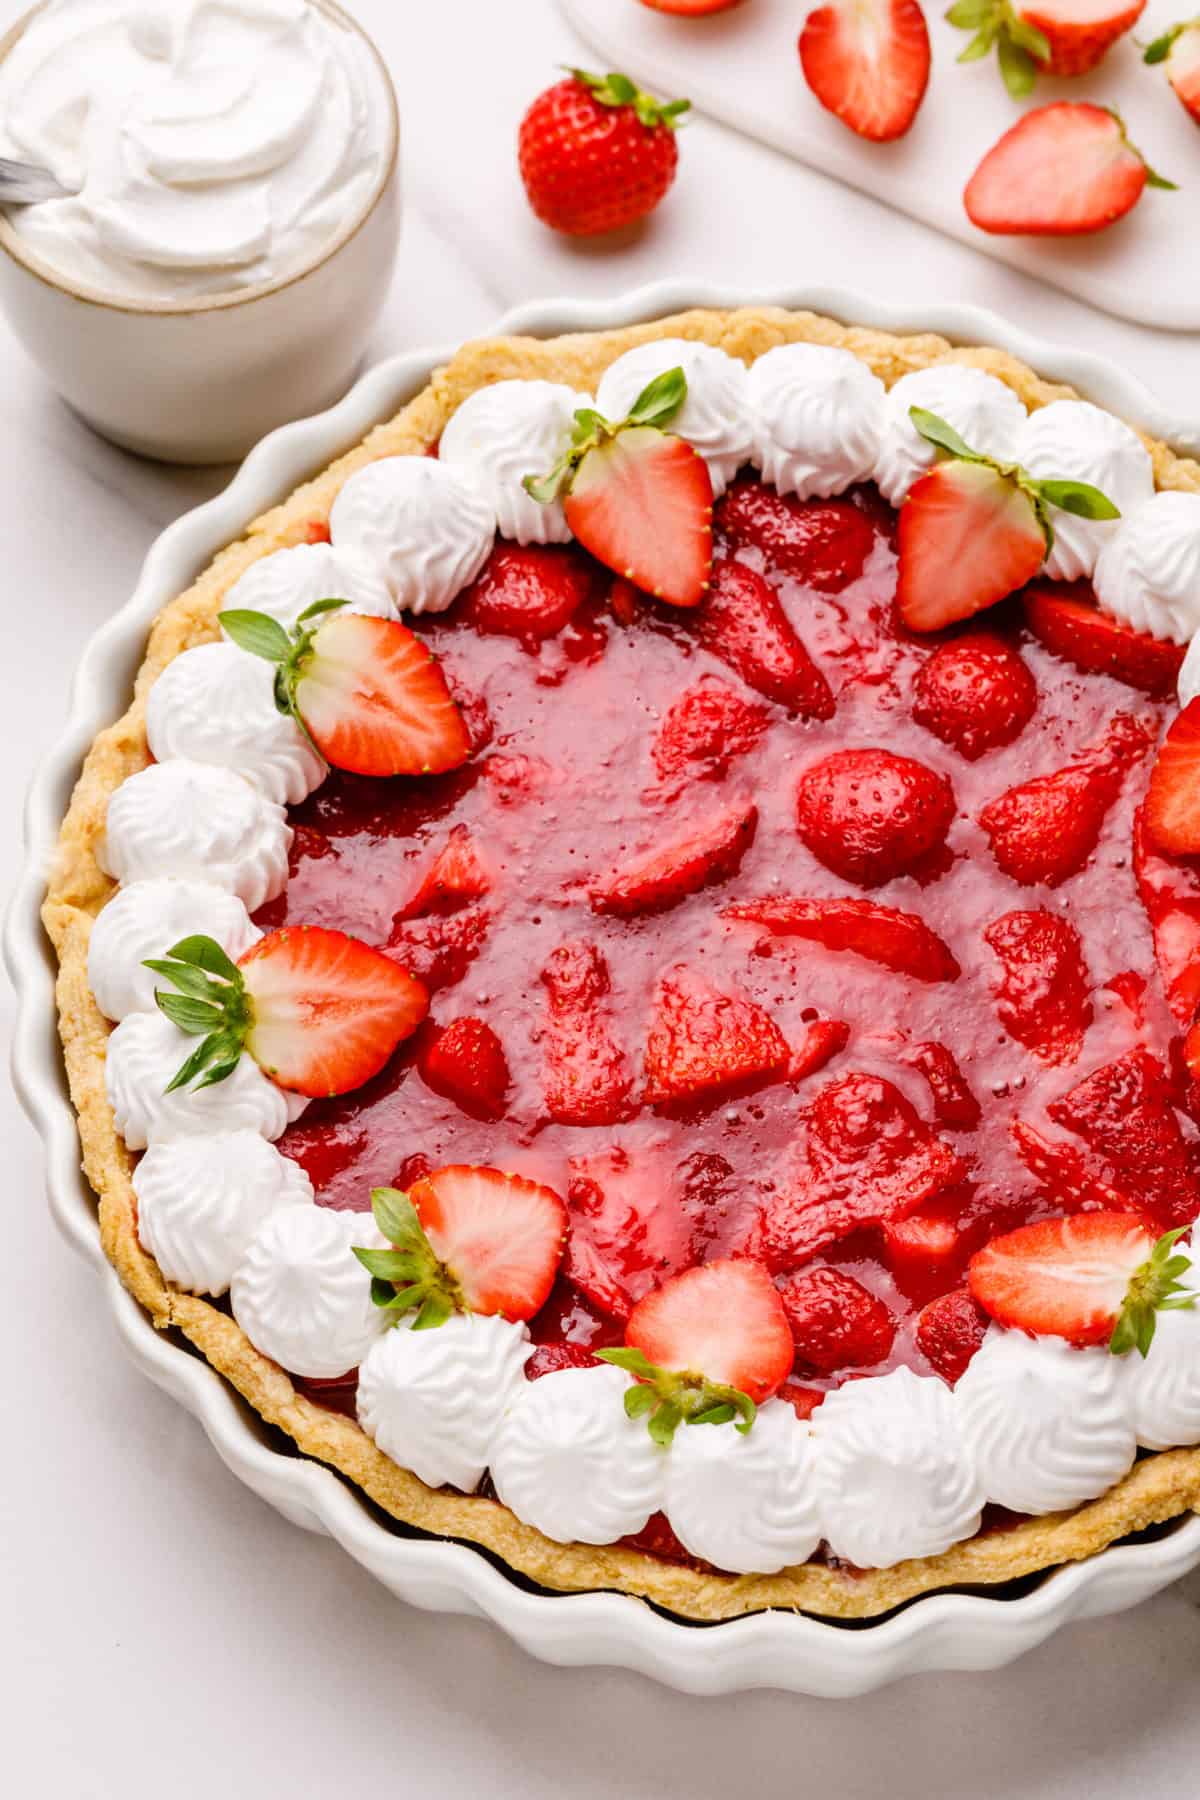 strawberry pie topped with fresh strawberries and chantilly cream